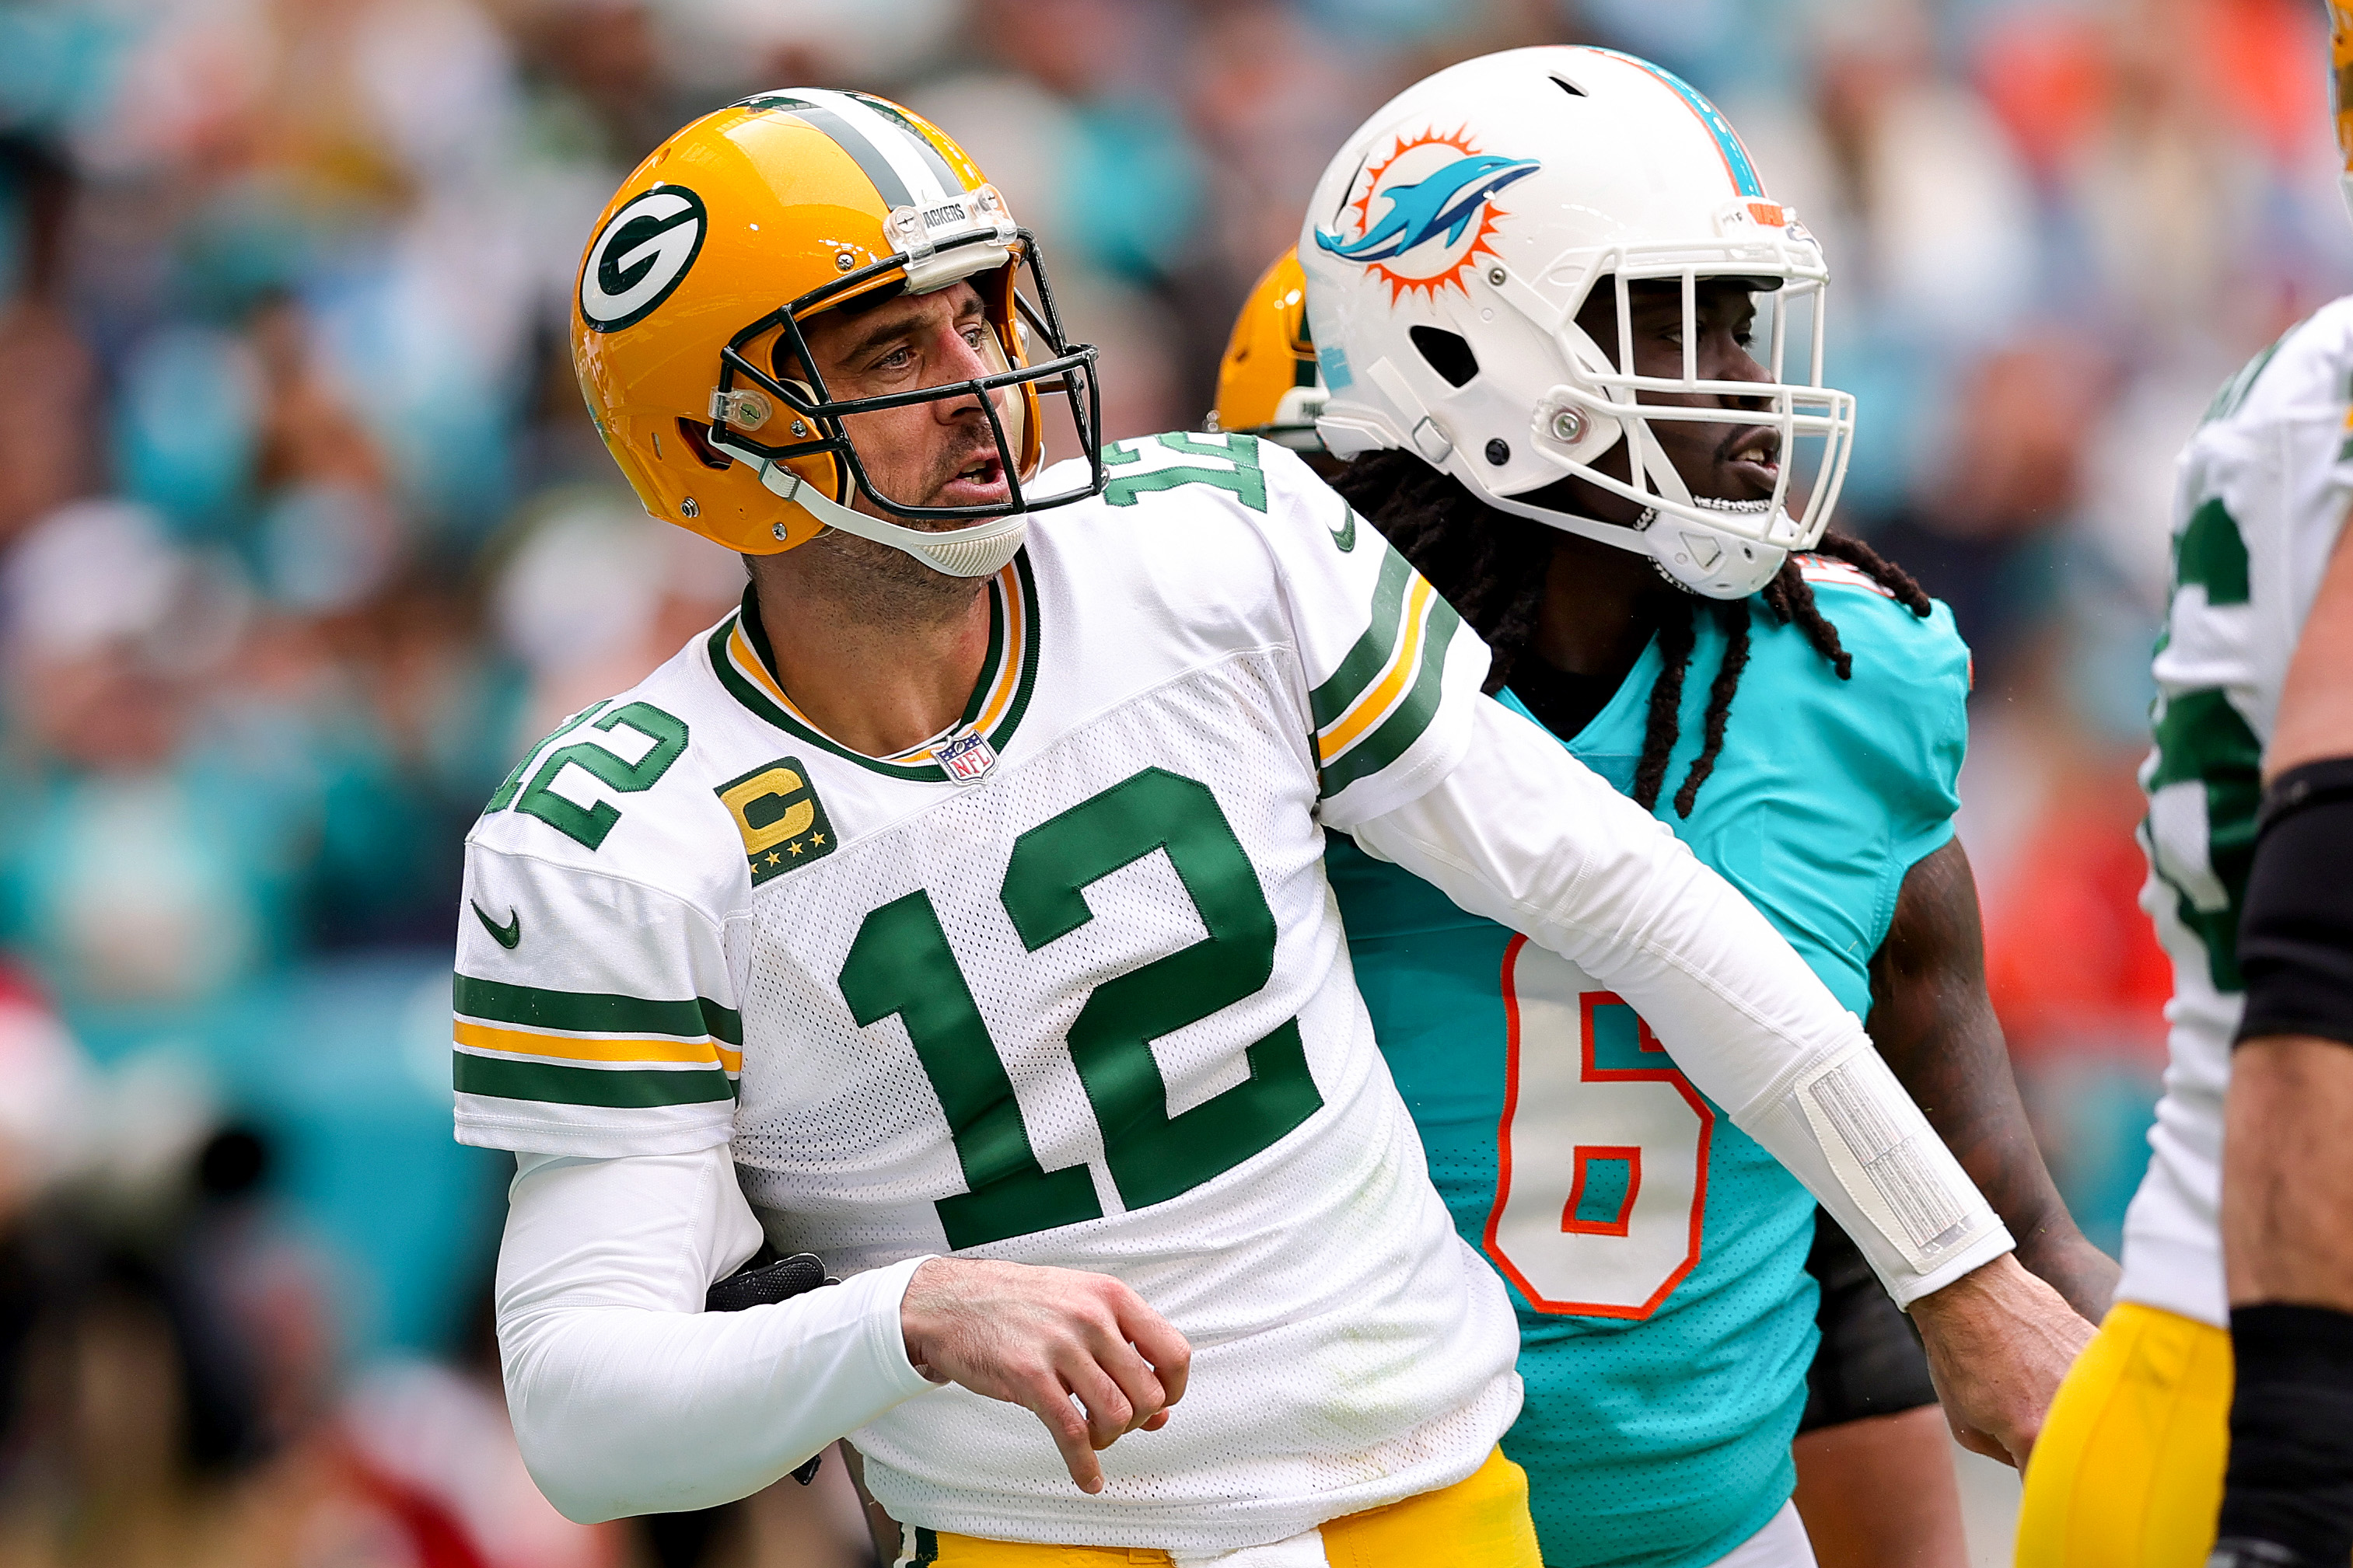 Aaron Rodgers of the Green Bay Packers reacts after throwing a pass against the Miami Dolphins.